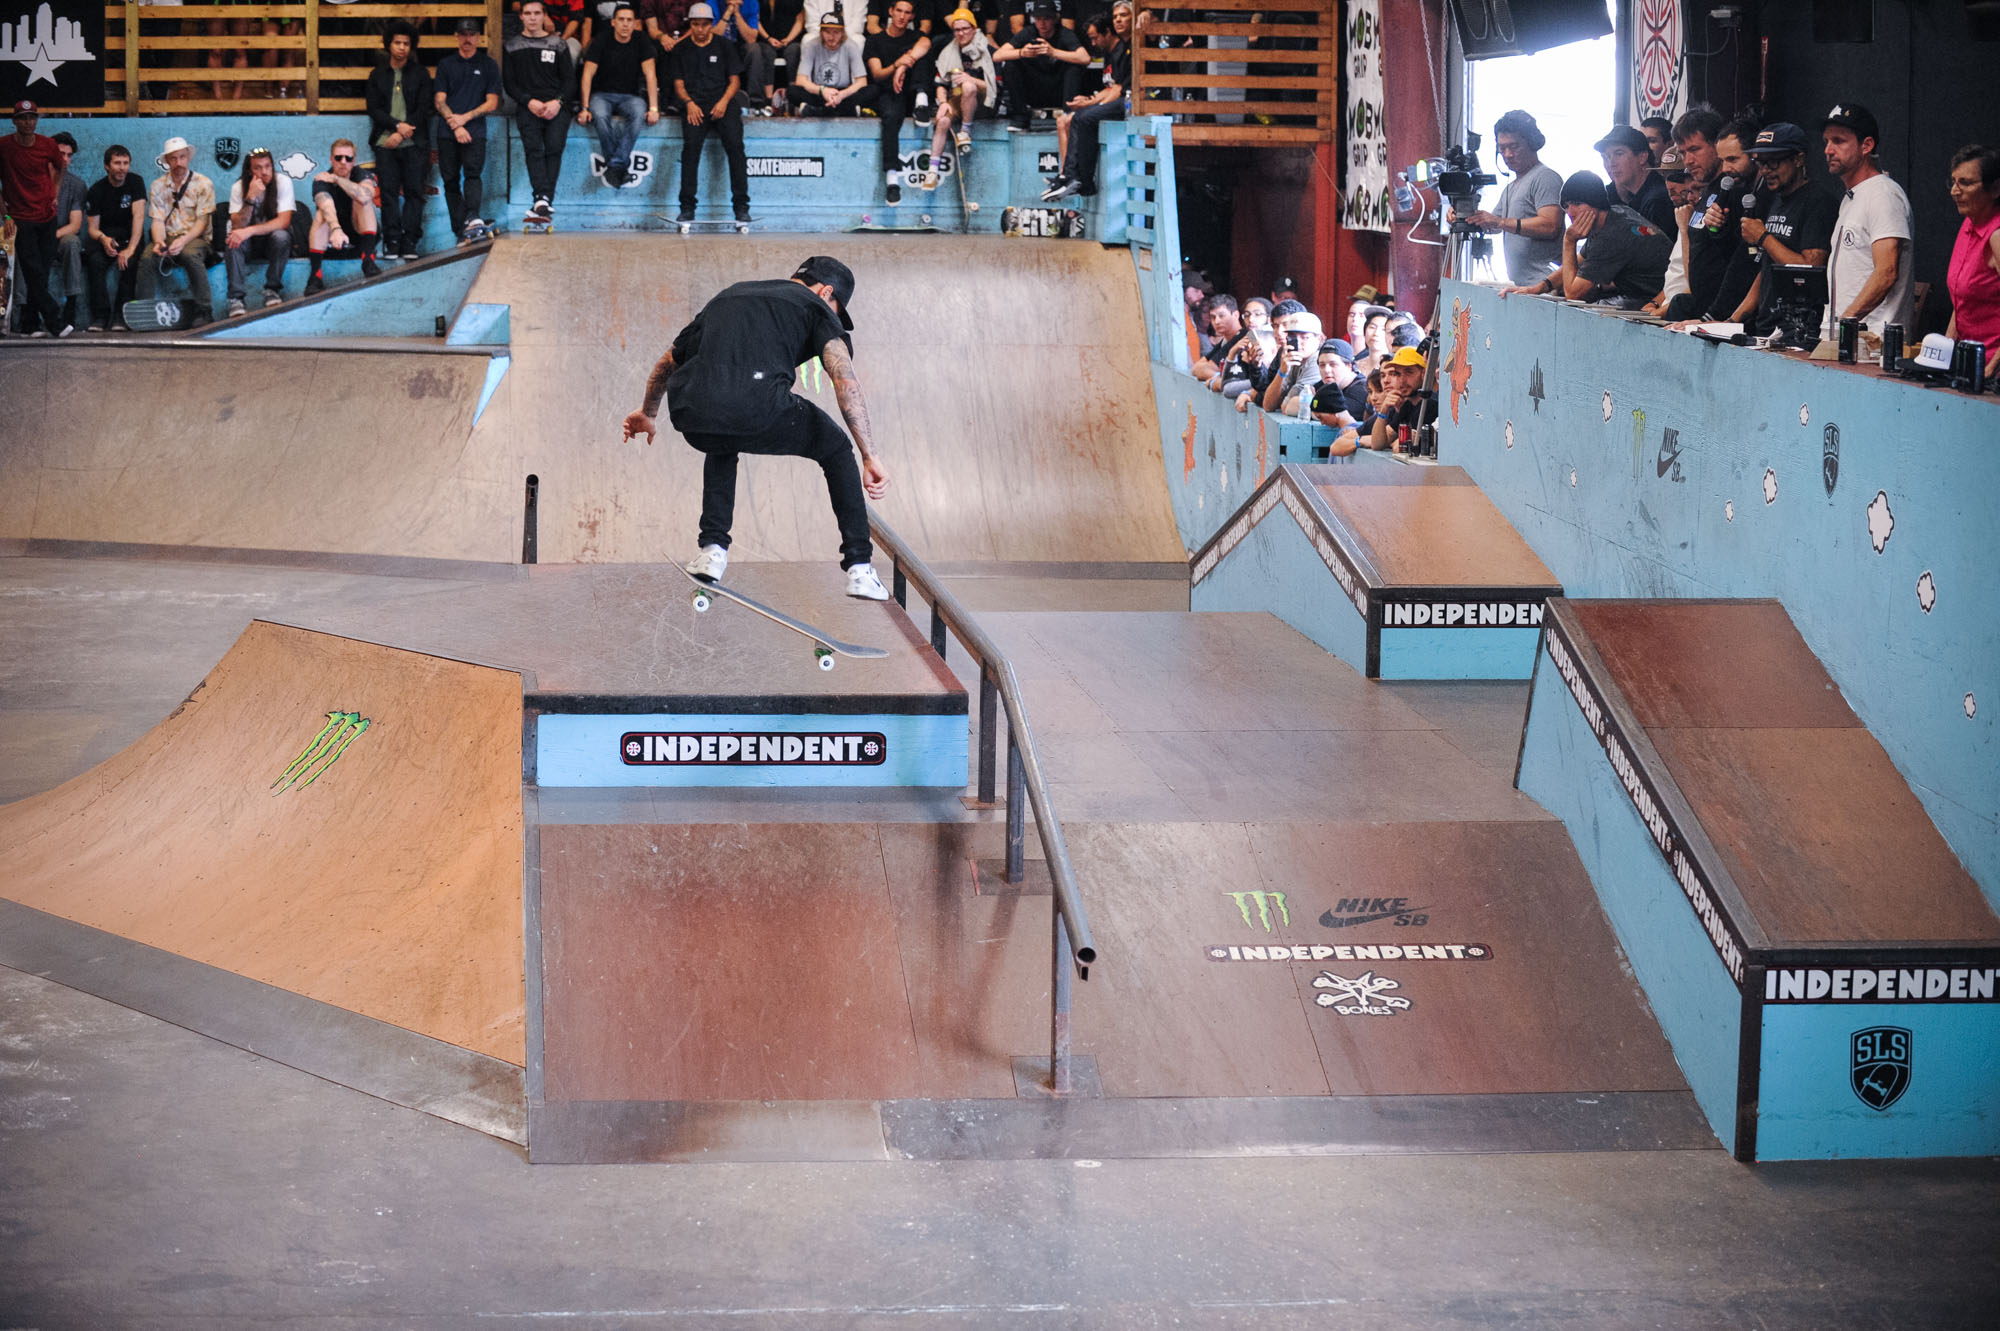 Monster Energy’s Nyjah Huston at the Tampa Pro 2016